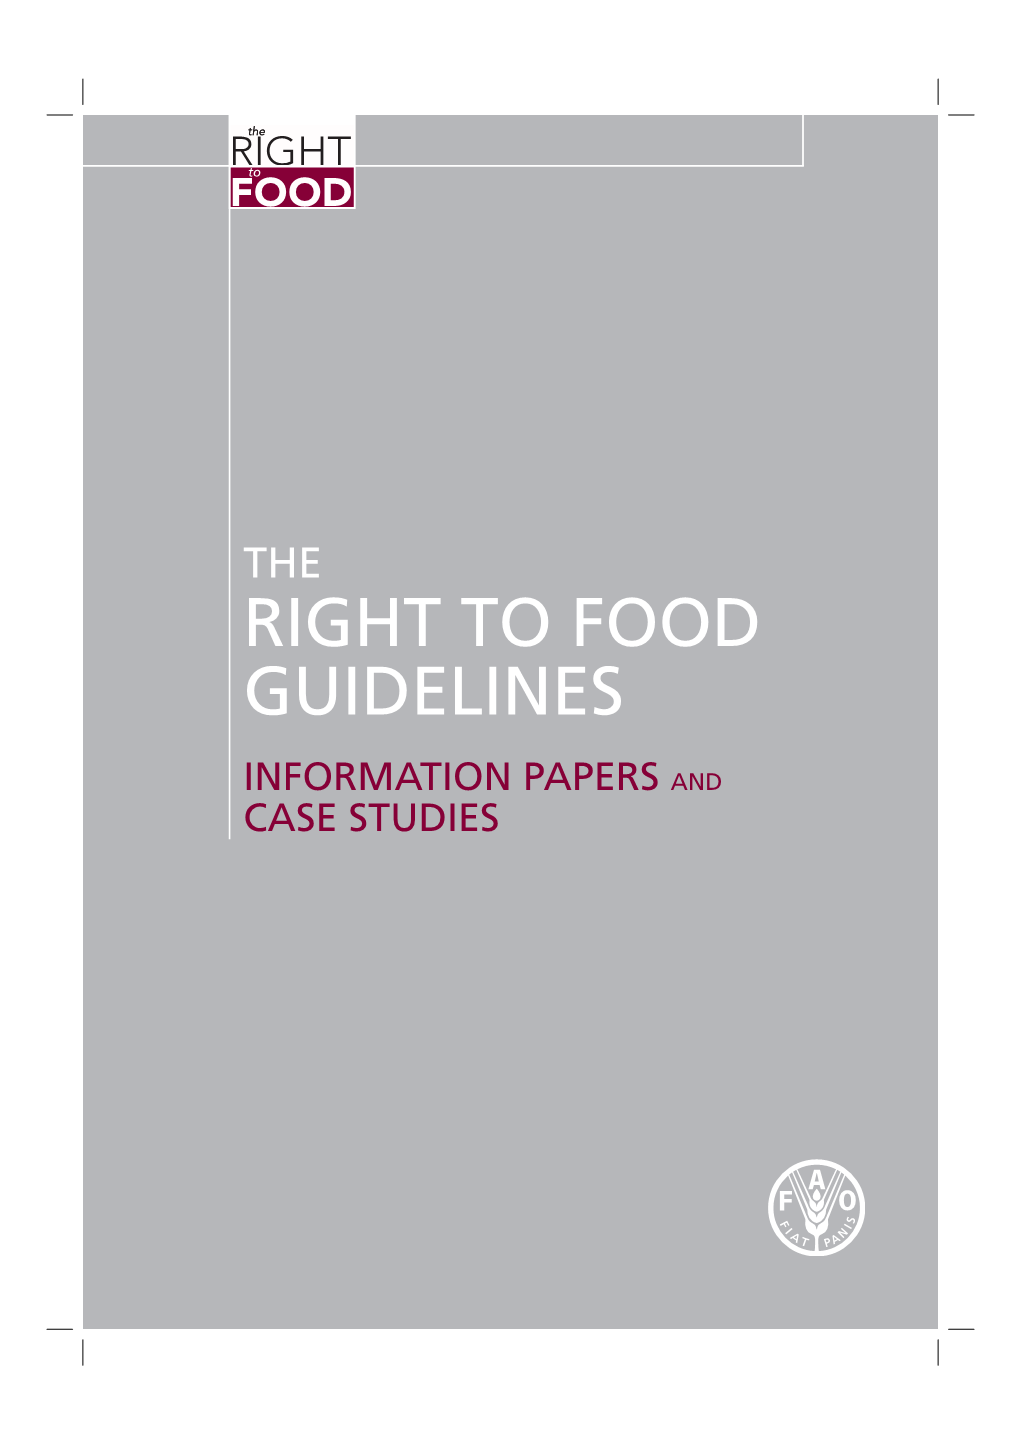 The Right to Food Guidelines, Information Papers and Case Studies